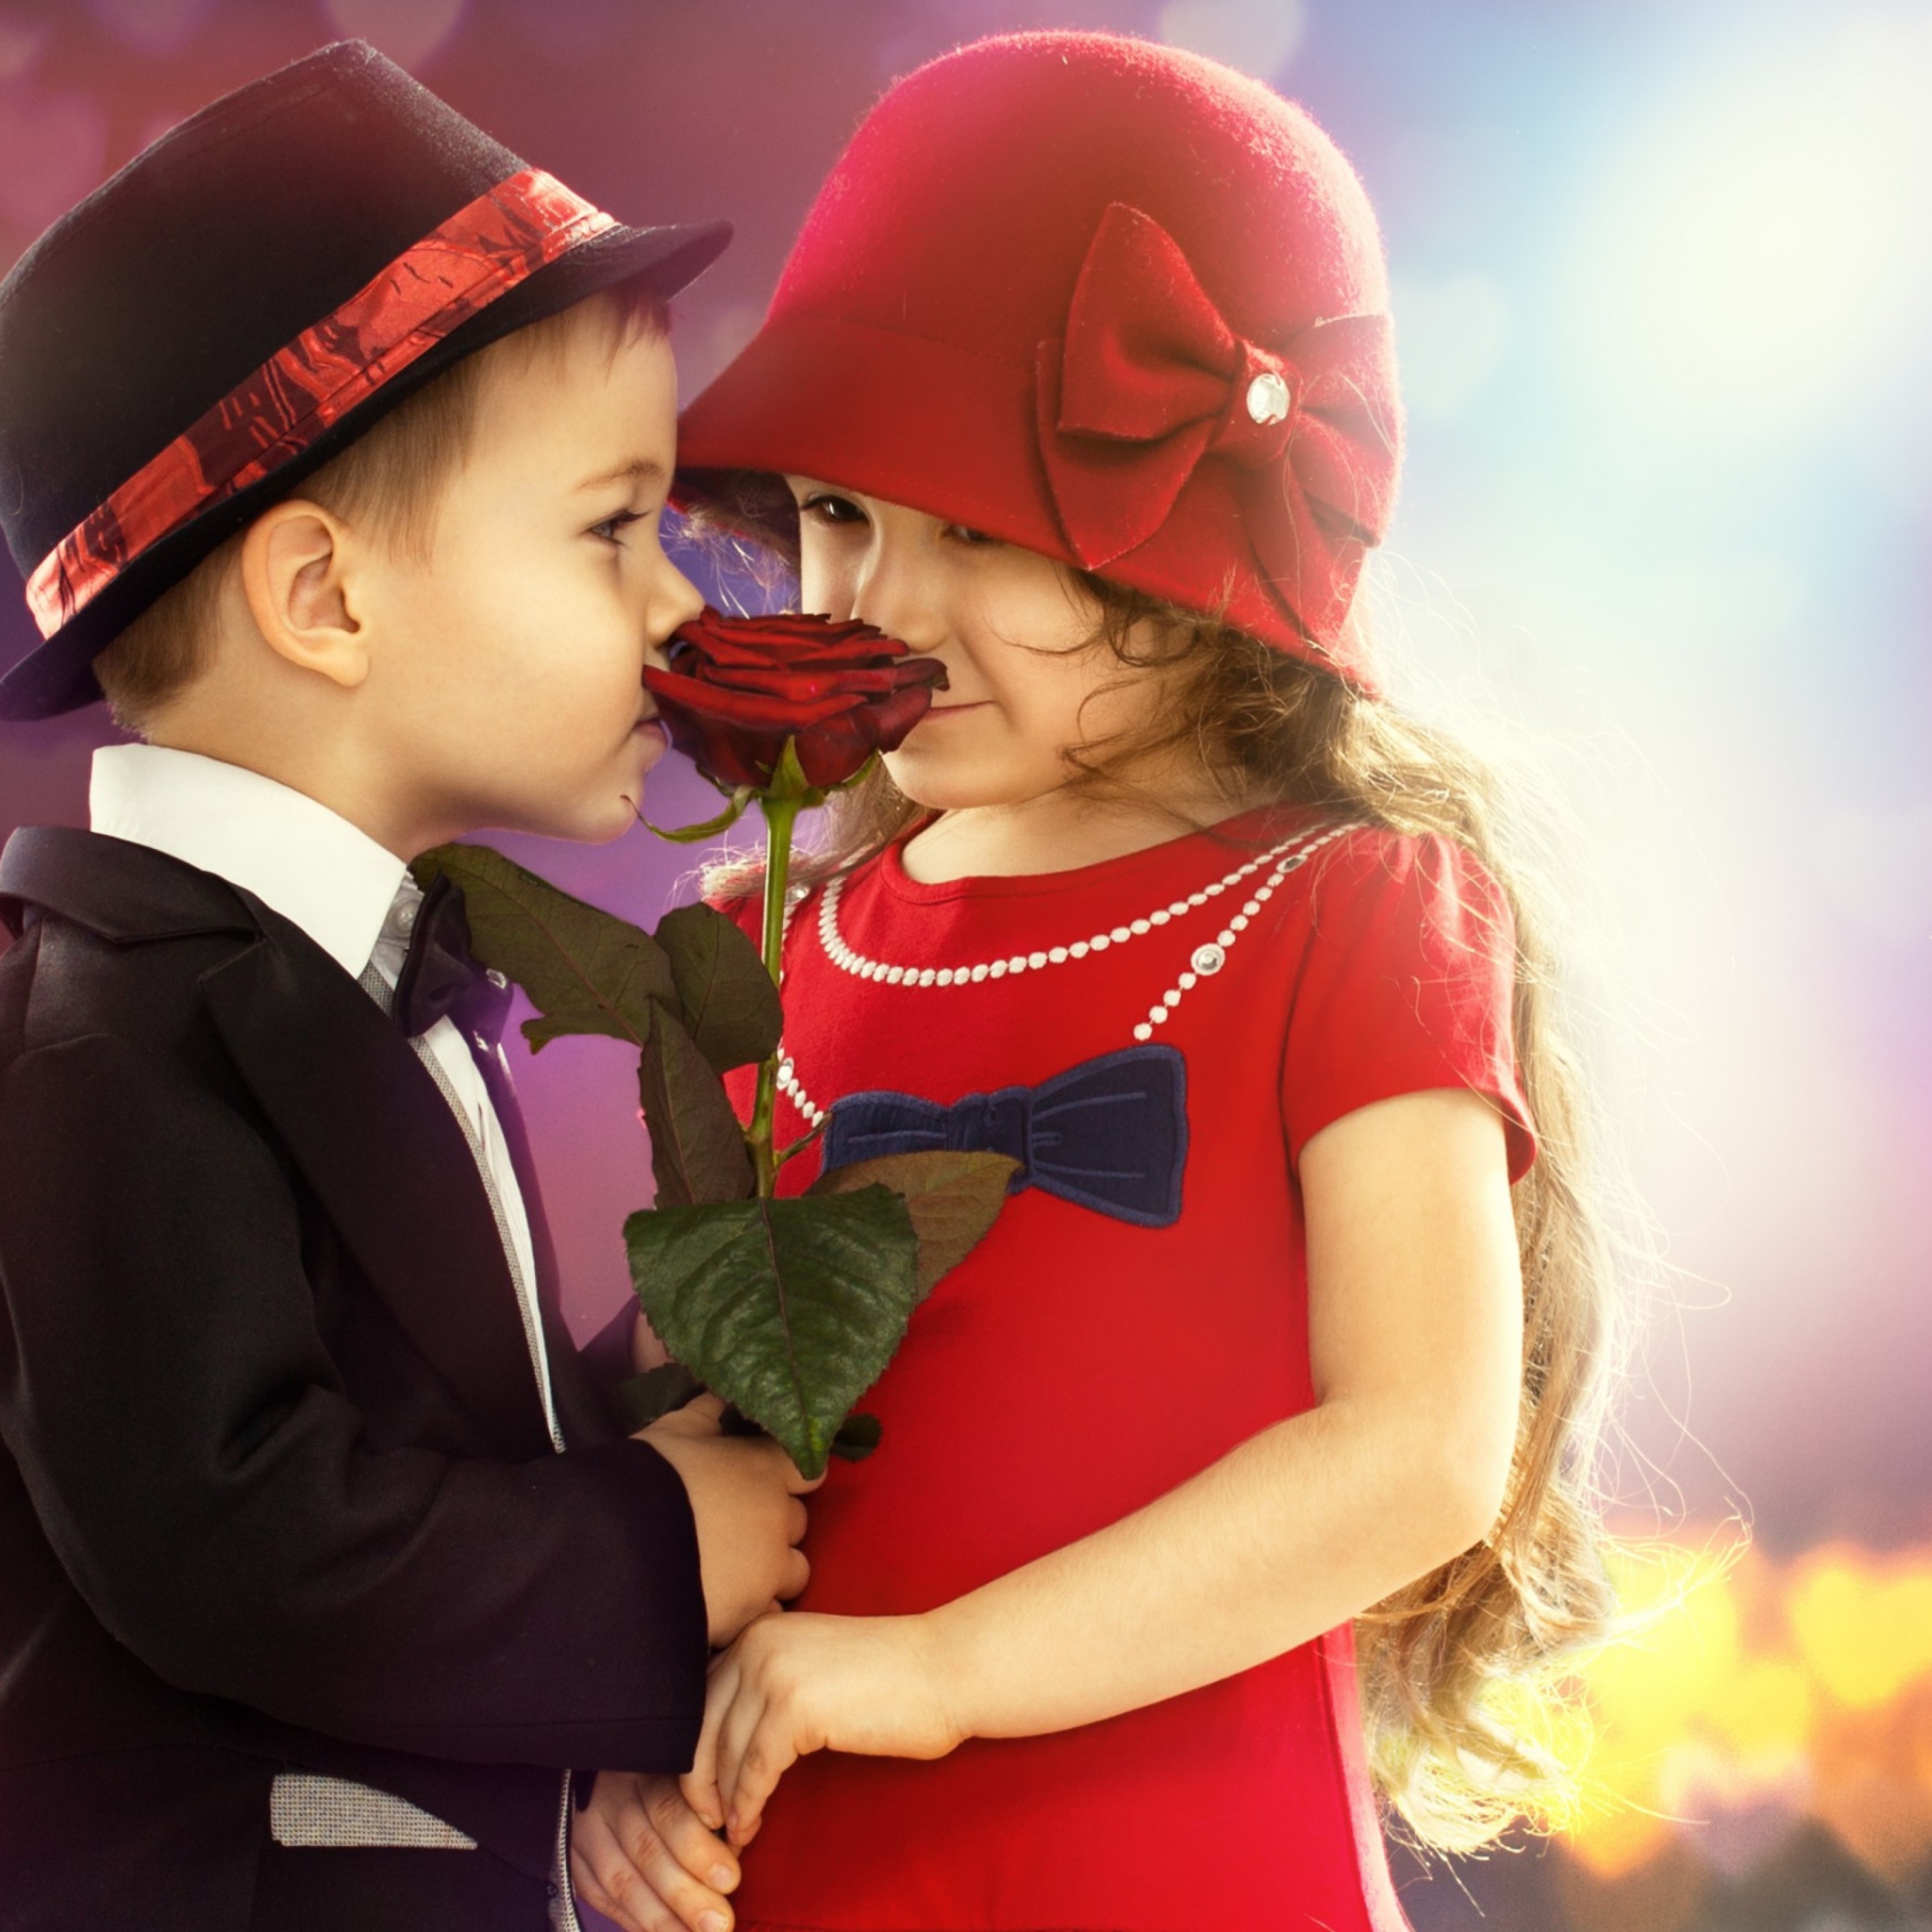 Cute Kids Couple With Rose wallpaper 2048x2048